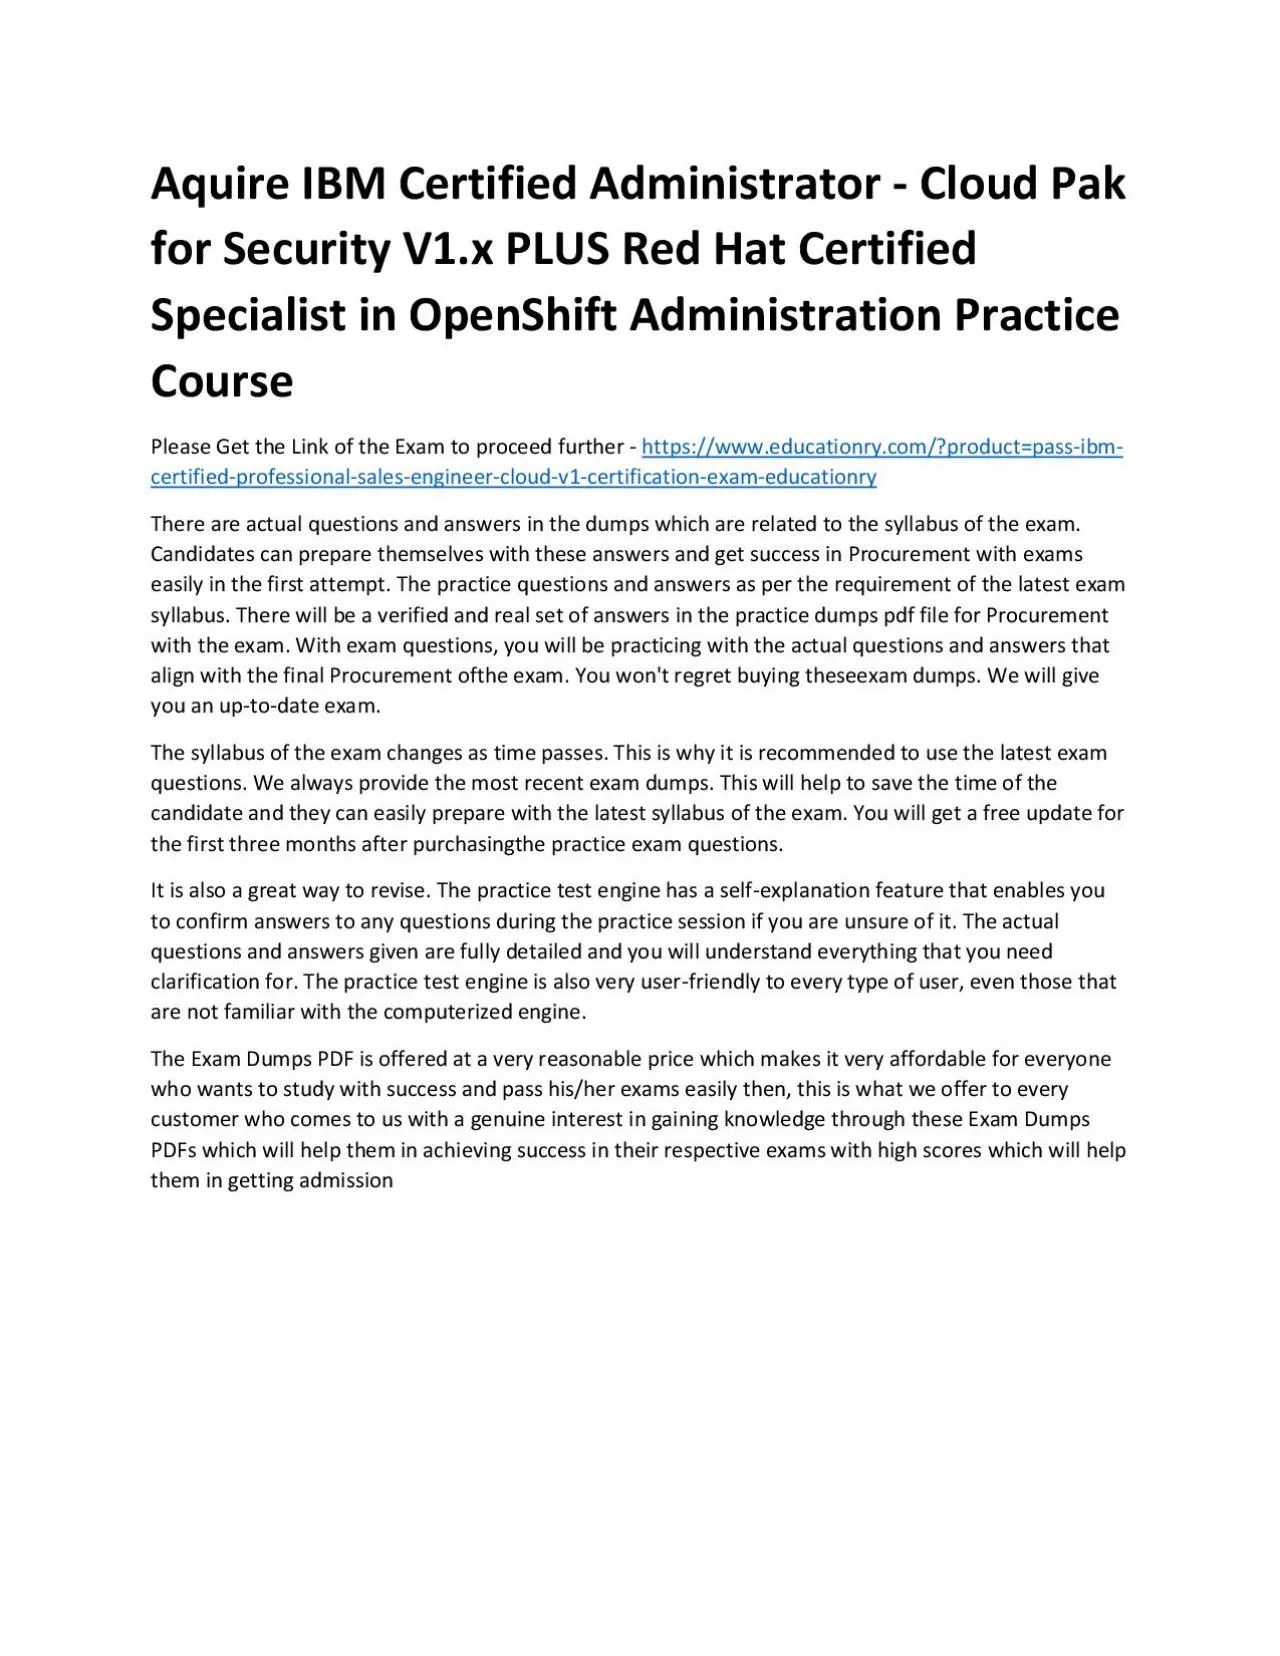 C0010400: IBM Certified Administrator - Cloud Pak for Security V1.x PLUS Red Hat Certified